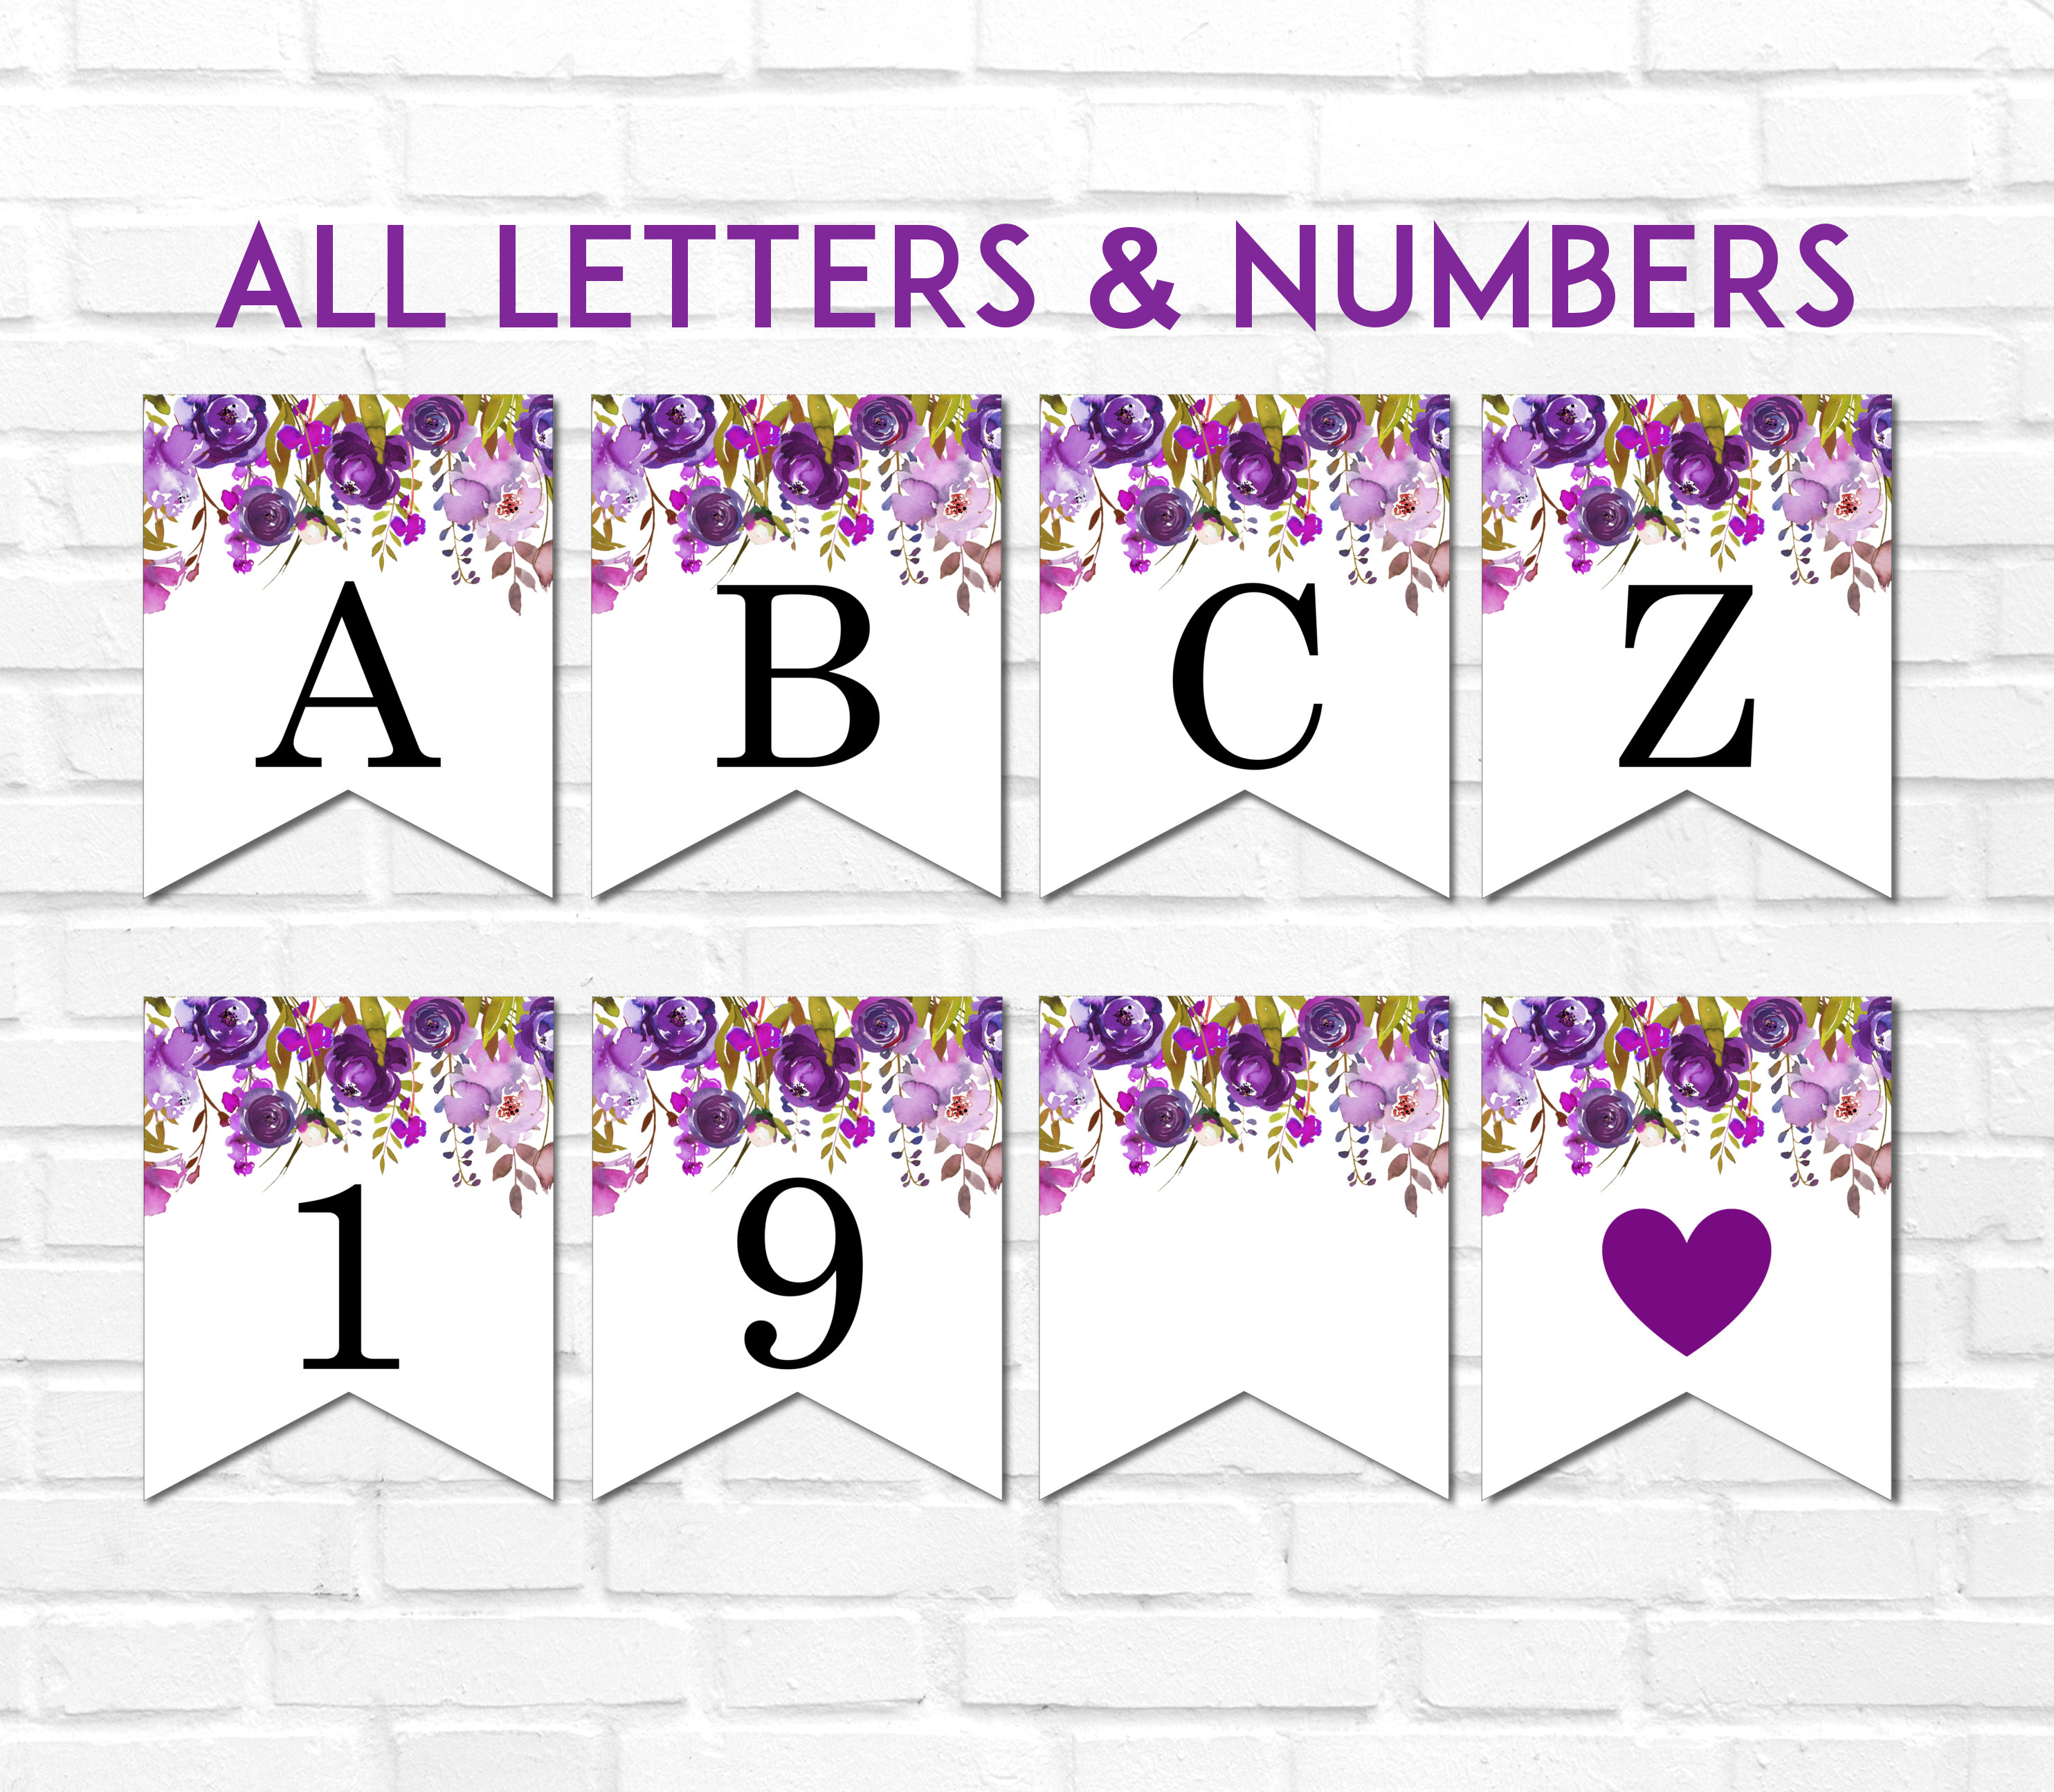 New A-Z 26 Letters Print 8-30 MM Purple Flowers Letter Birthday Gift Round  photo glass